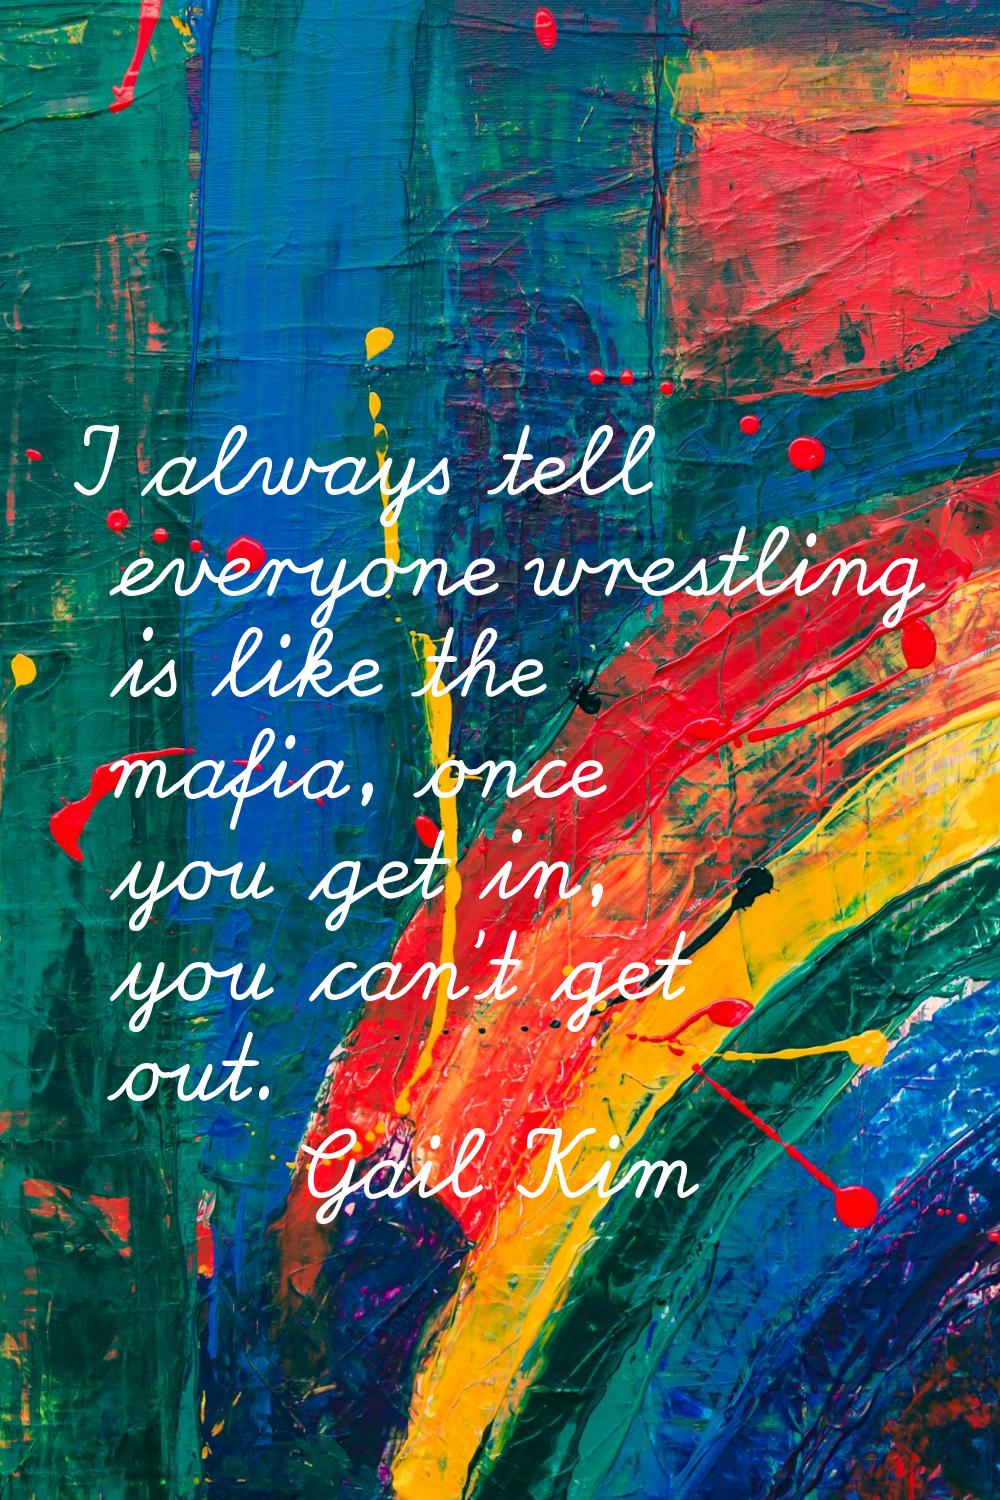 I always tell everyone wrestling is like the mafia, once you get in, you can't get out.